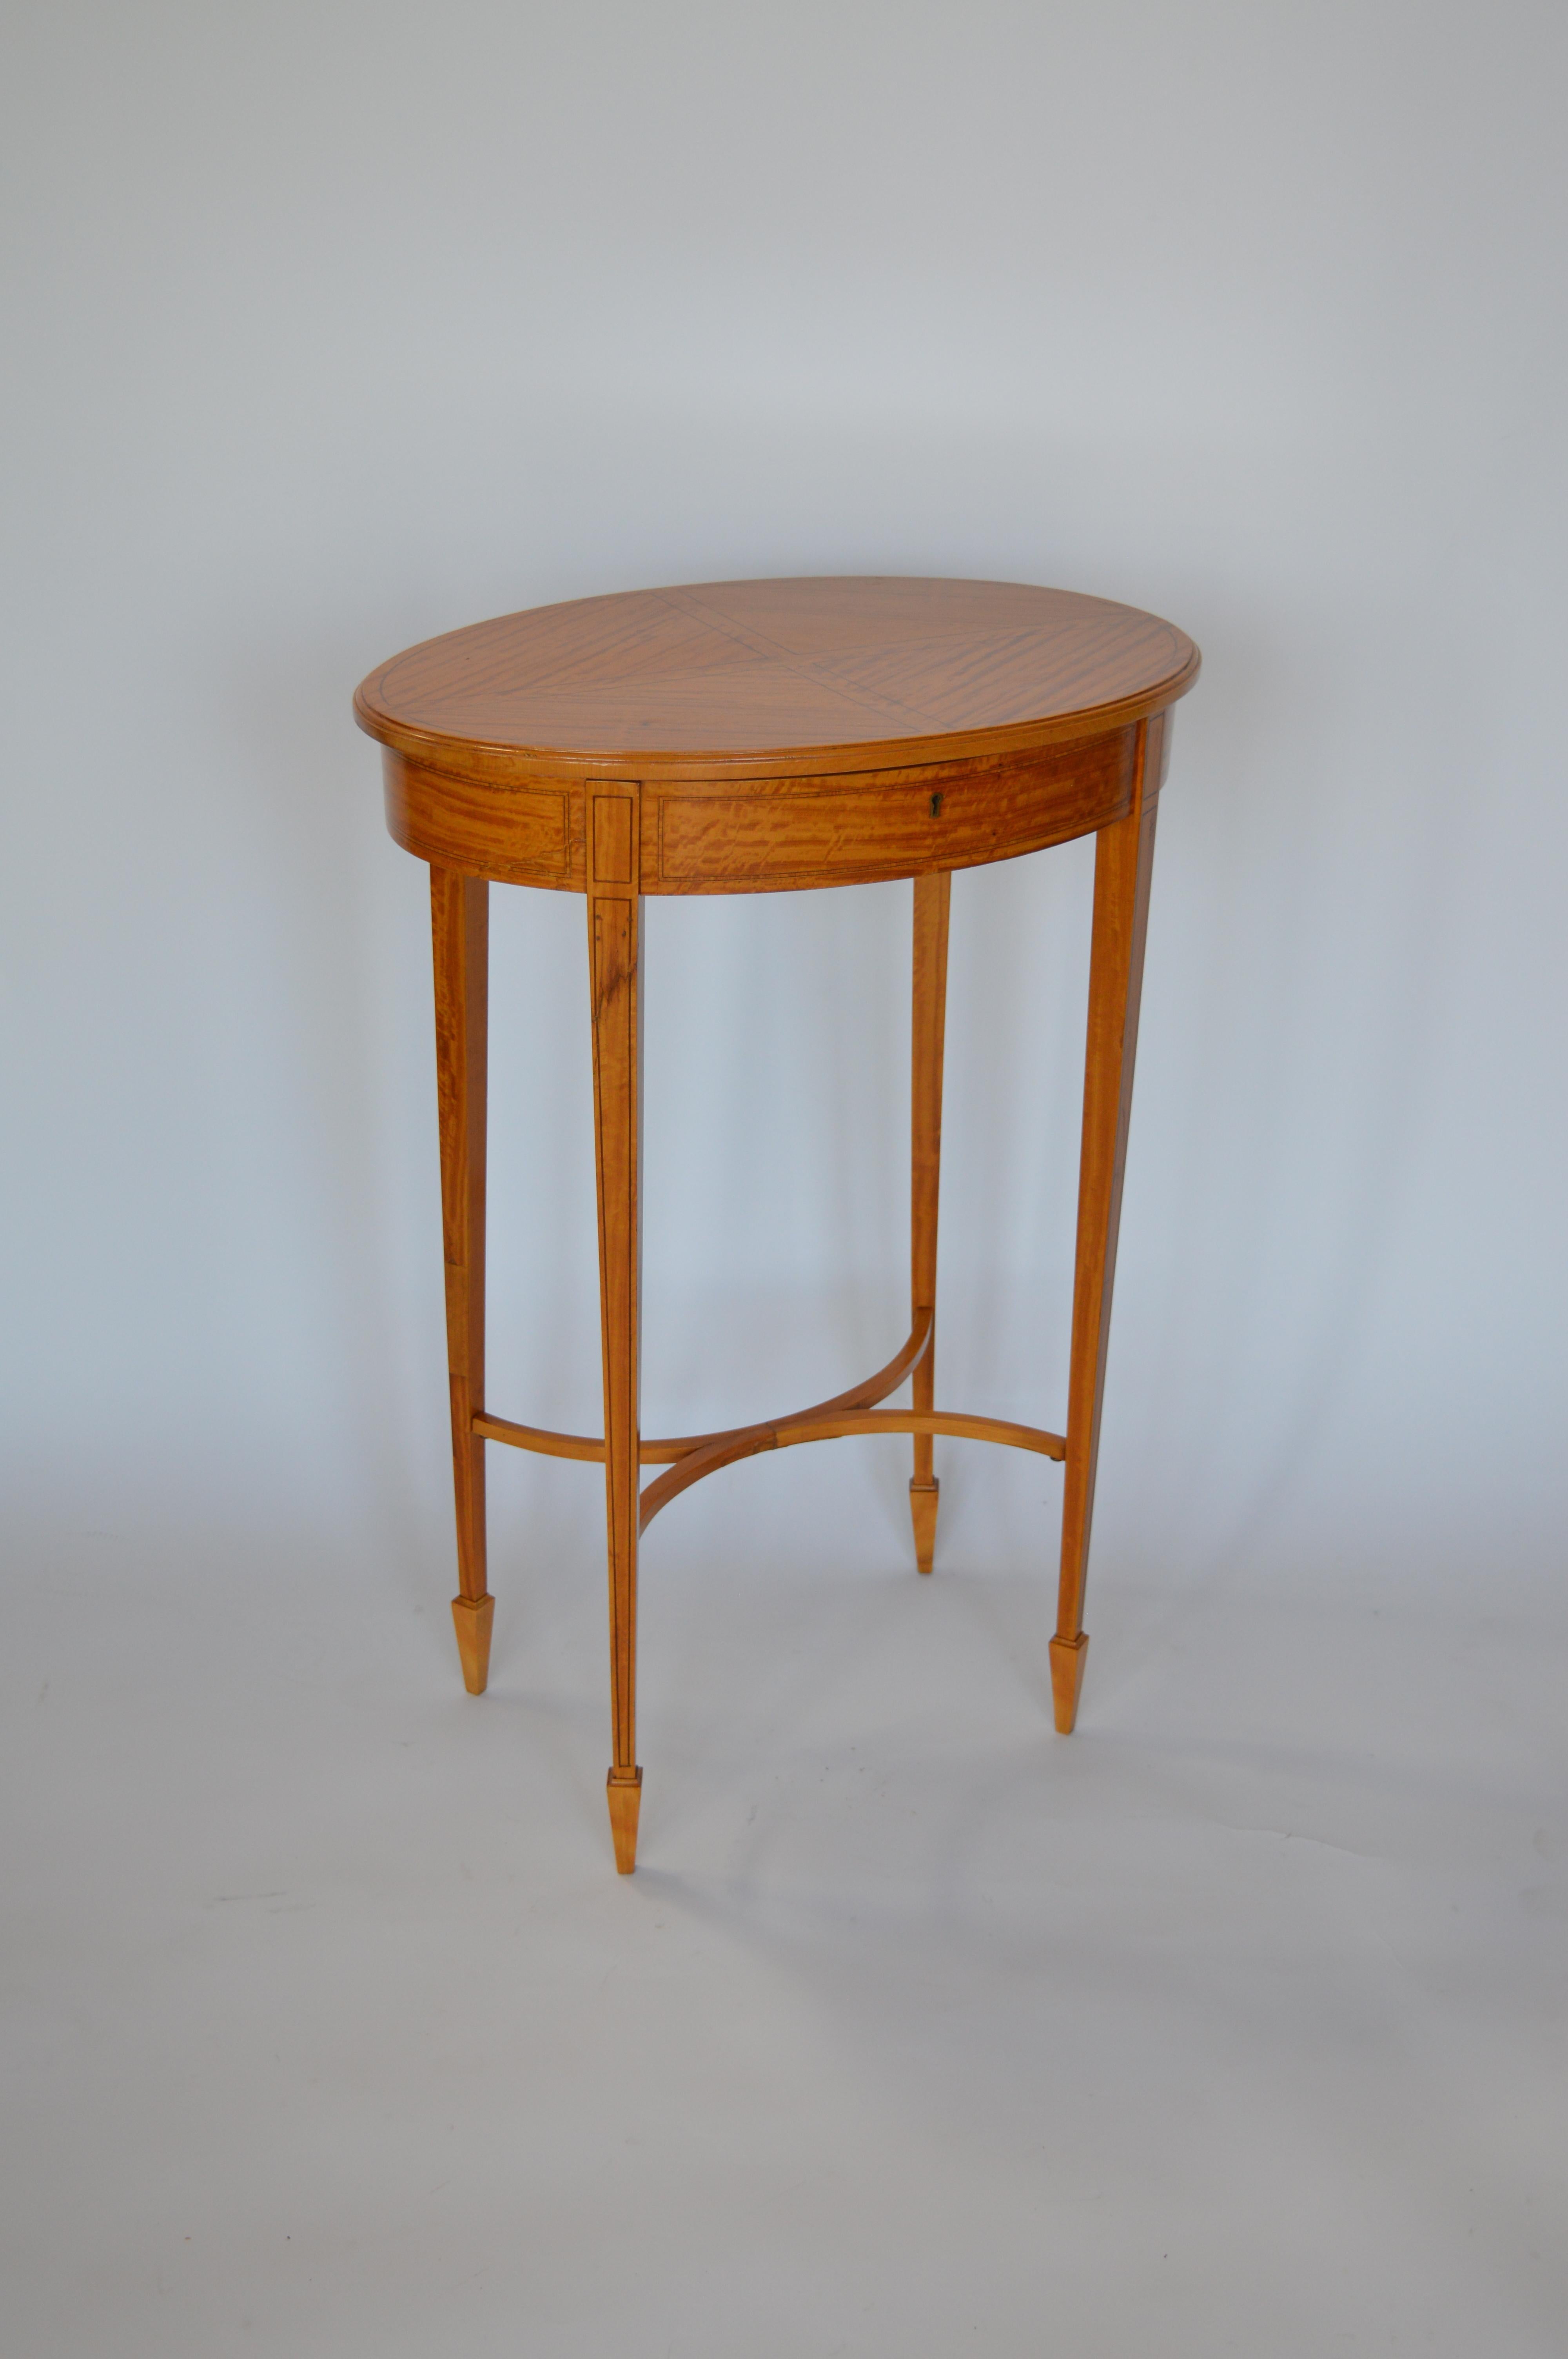 Late 19th century oval satinwood sewing table/stand. Hinged top and fitted interiors. 
 
*Does not include key.